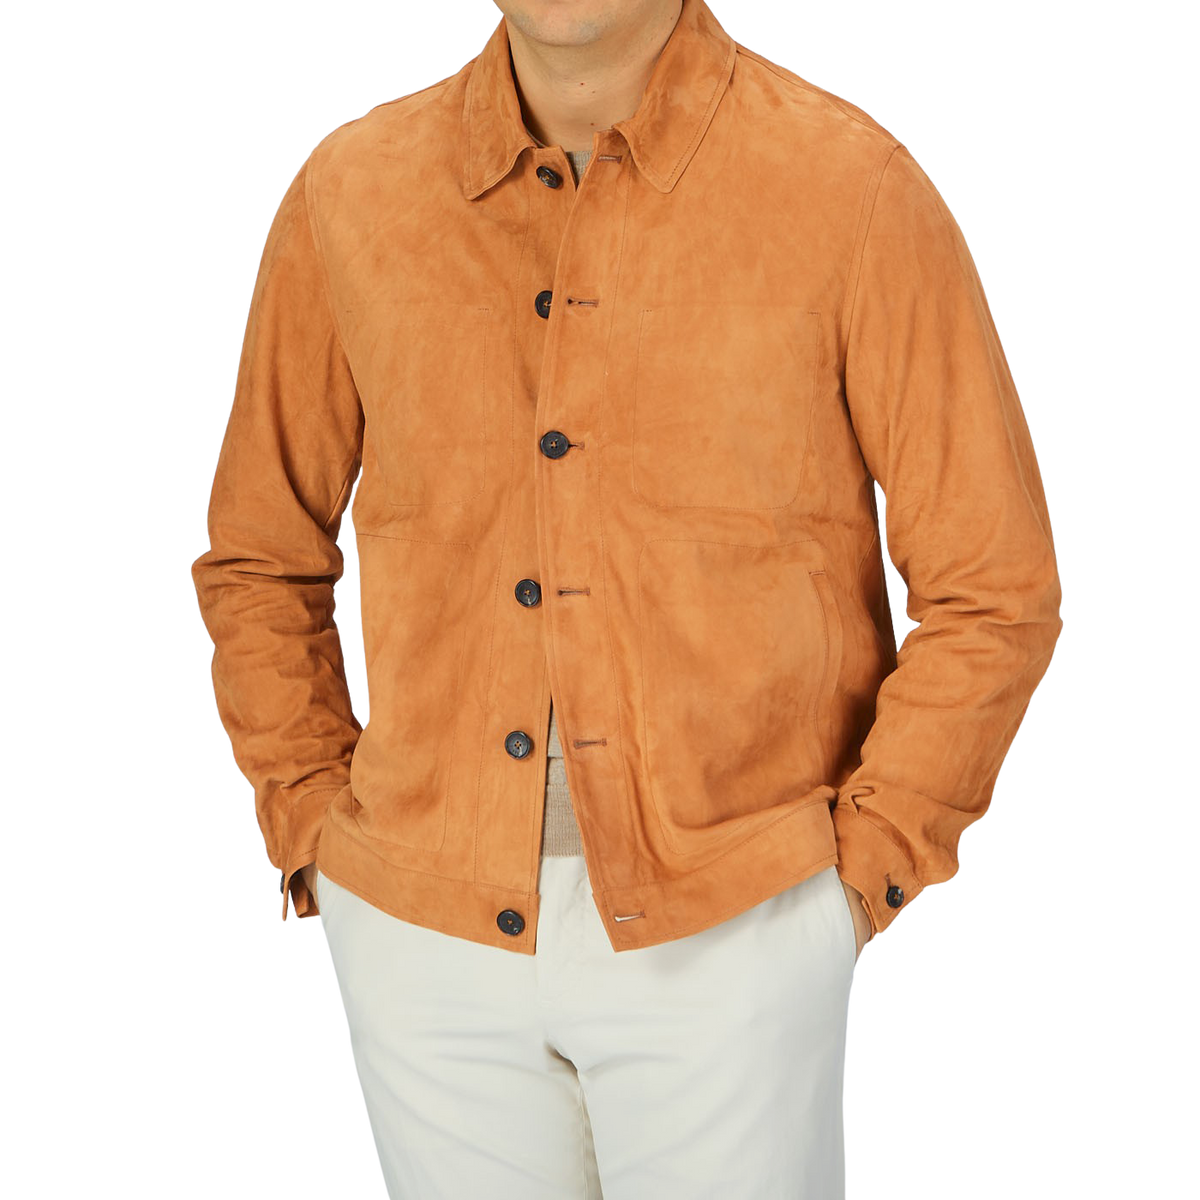 The man is wearing a Manto Bright Tan Suede Leather Overshirt.